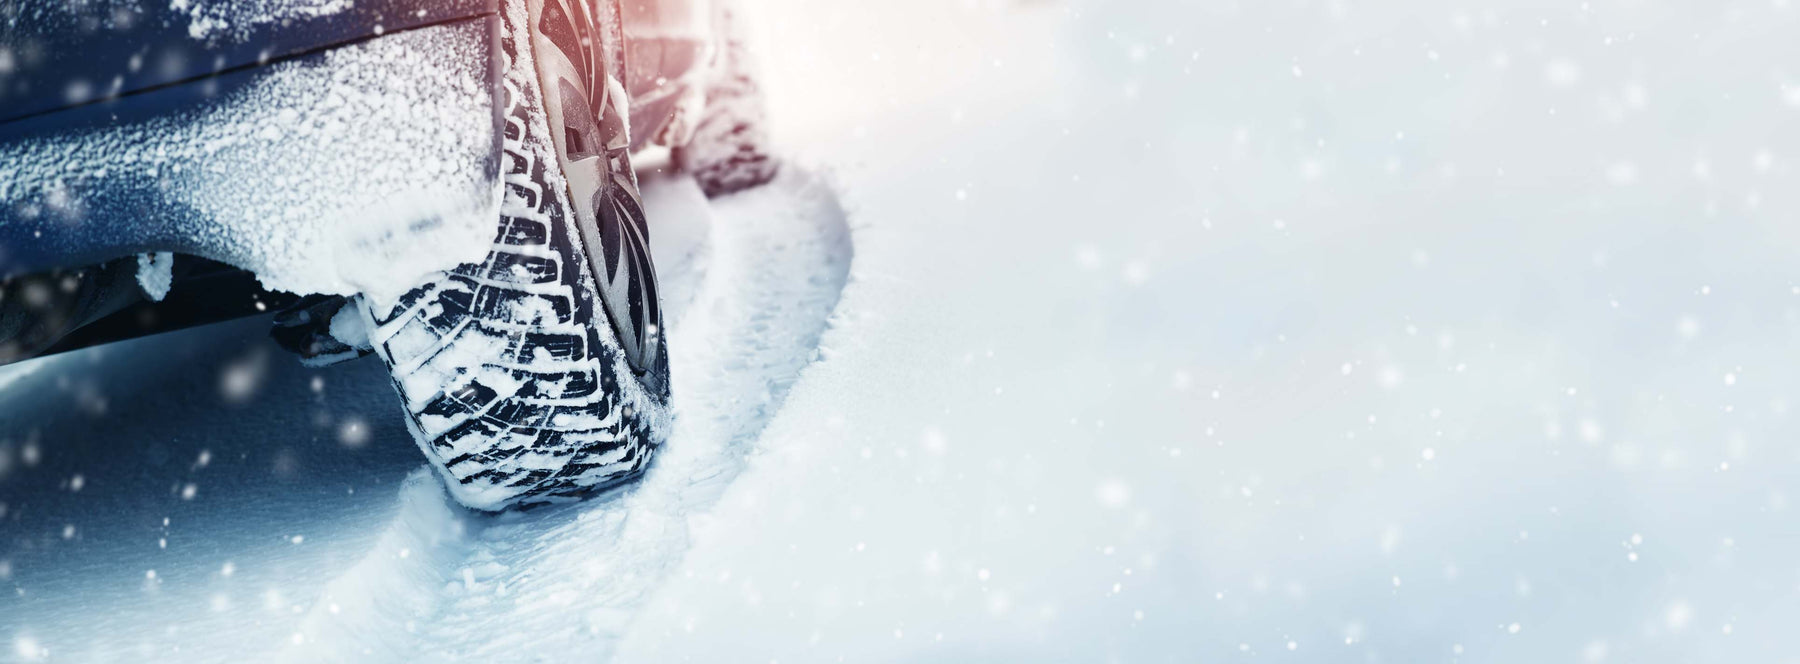 Winter Vehicle Prep: The 3 Levels of Winter Emergency Kits